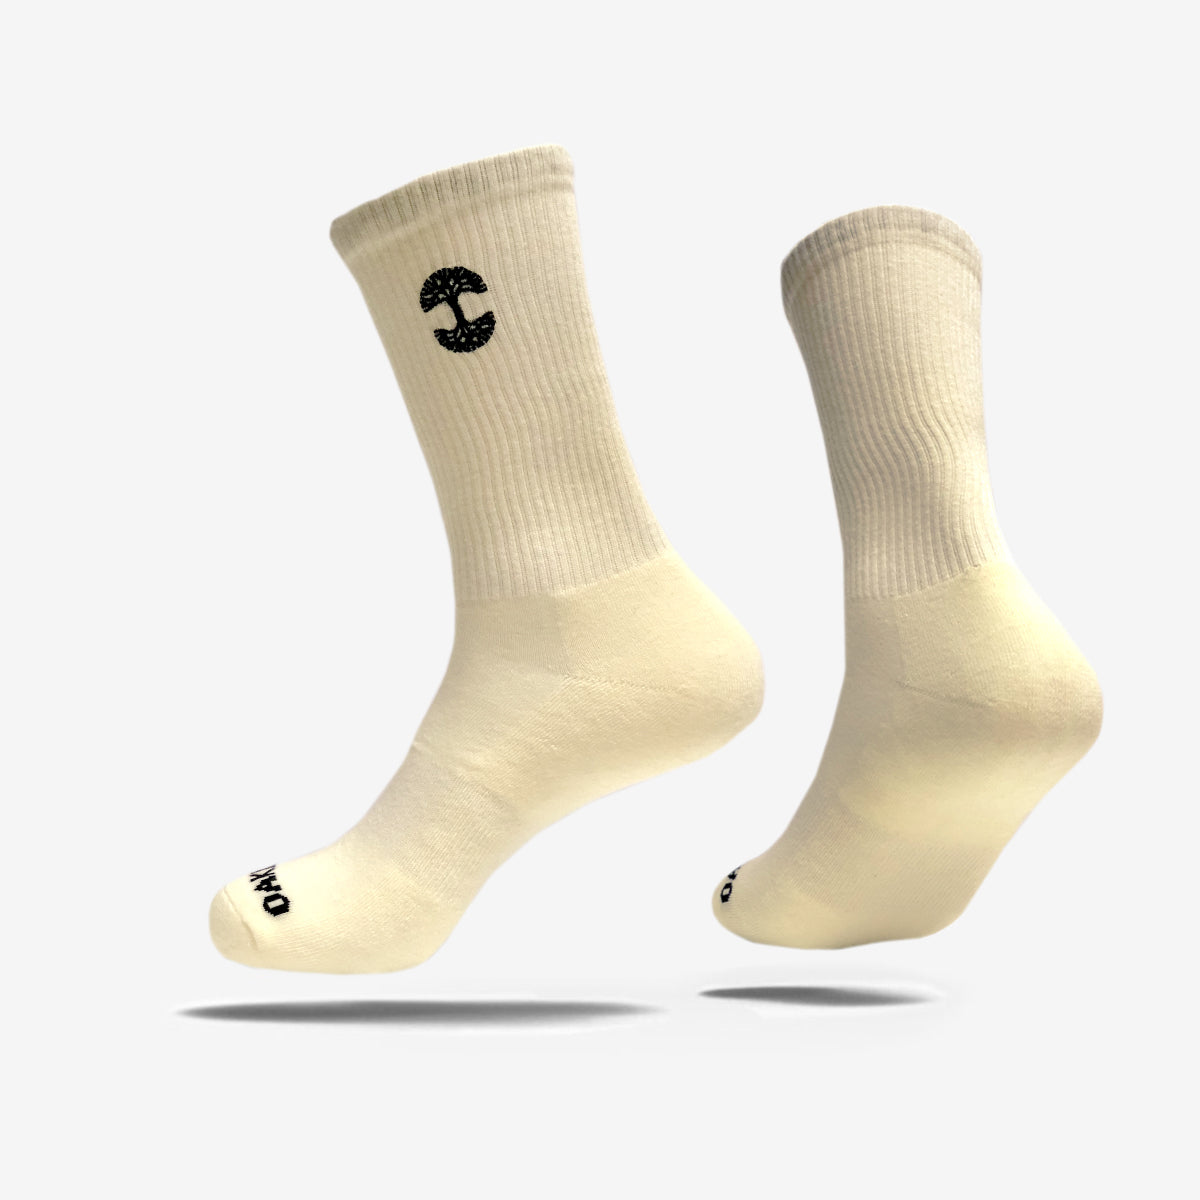 High-cut men's cream crew socks with black embroidered Oaklandish logo at the top.